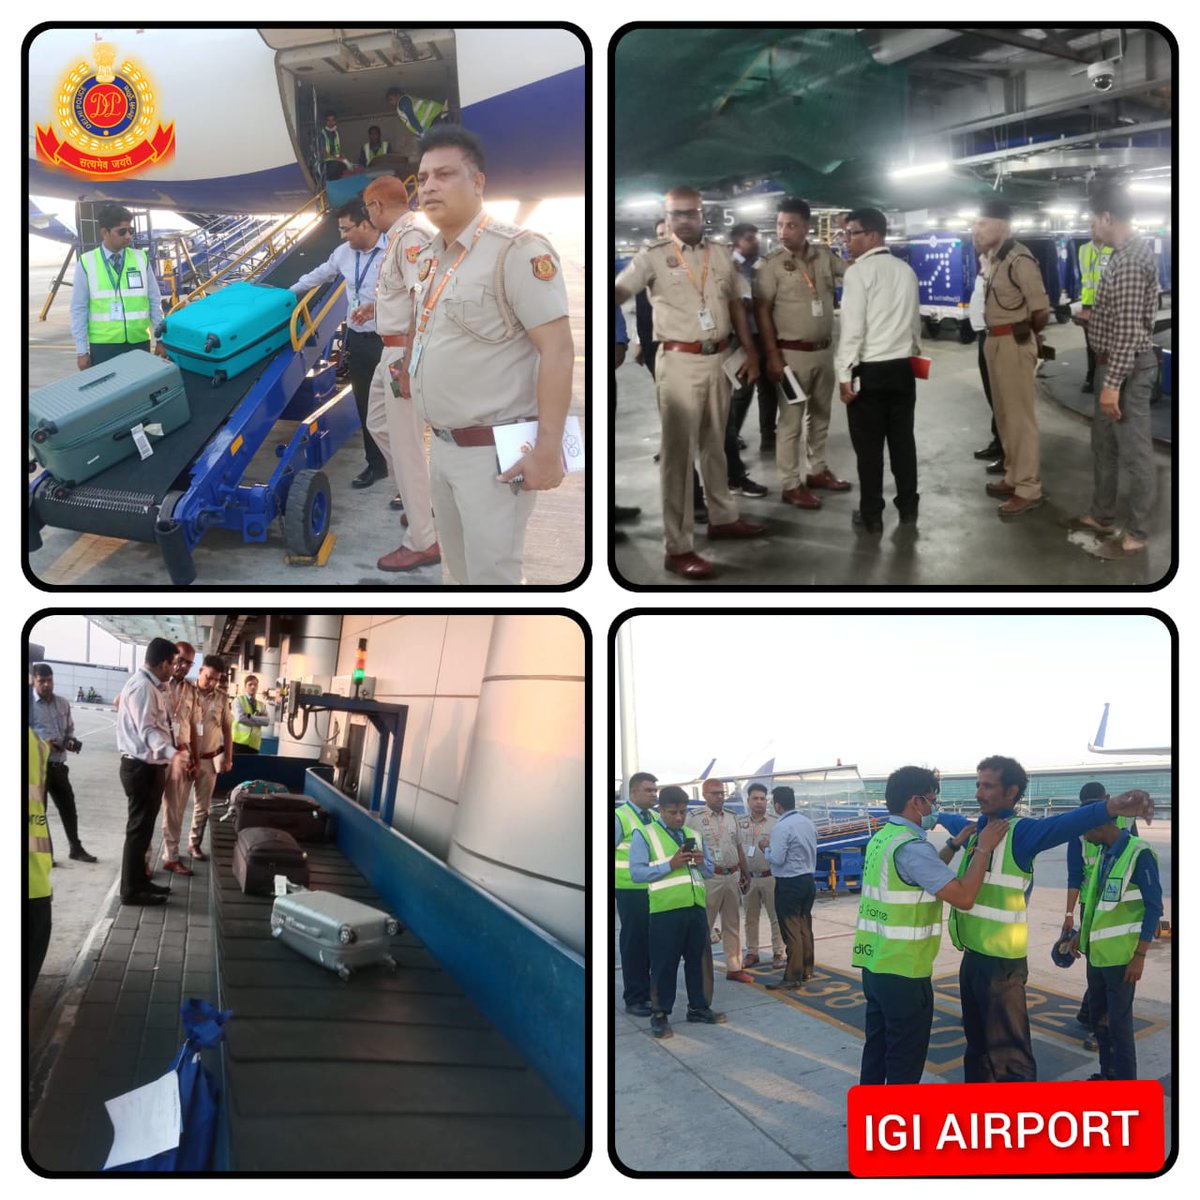 Your peace of mind is our priority at IGI Police

Our vigilant presence in luggage loading, unloading, and baggage hold areas ensures every flyer's belongings are safe and secure

Fly worry-free knowing we've got your back

#IGIAPolice #SafeTravel ✈️🛅